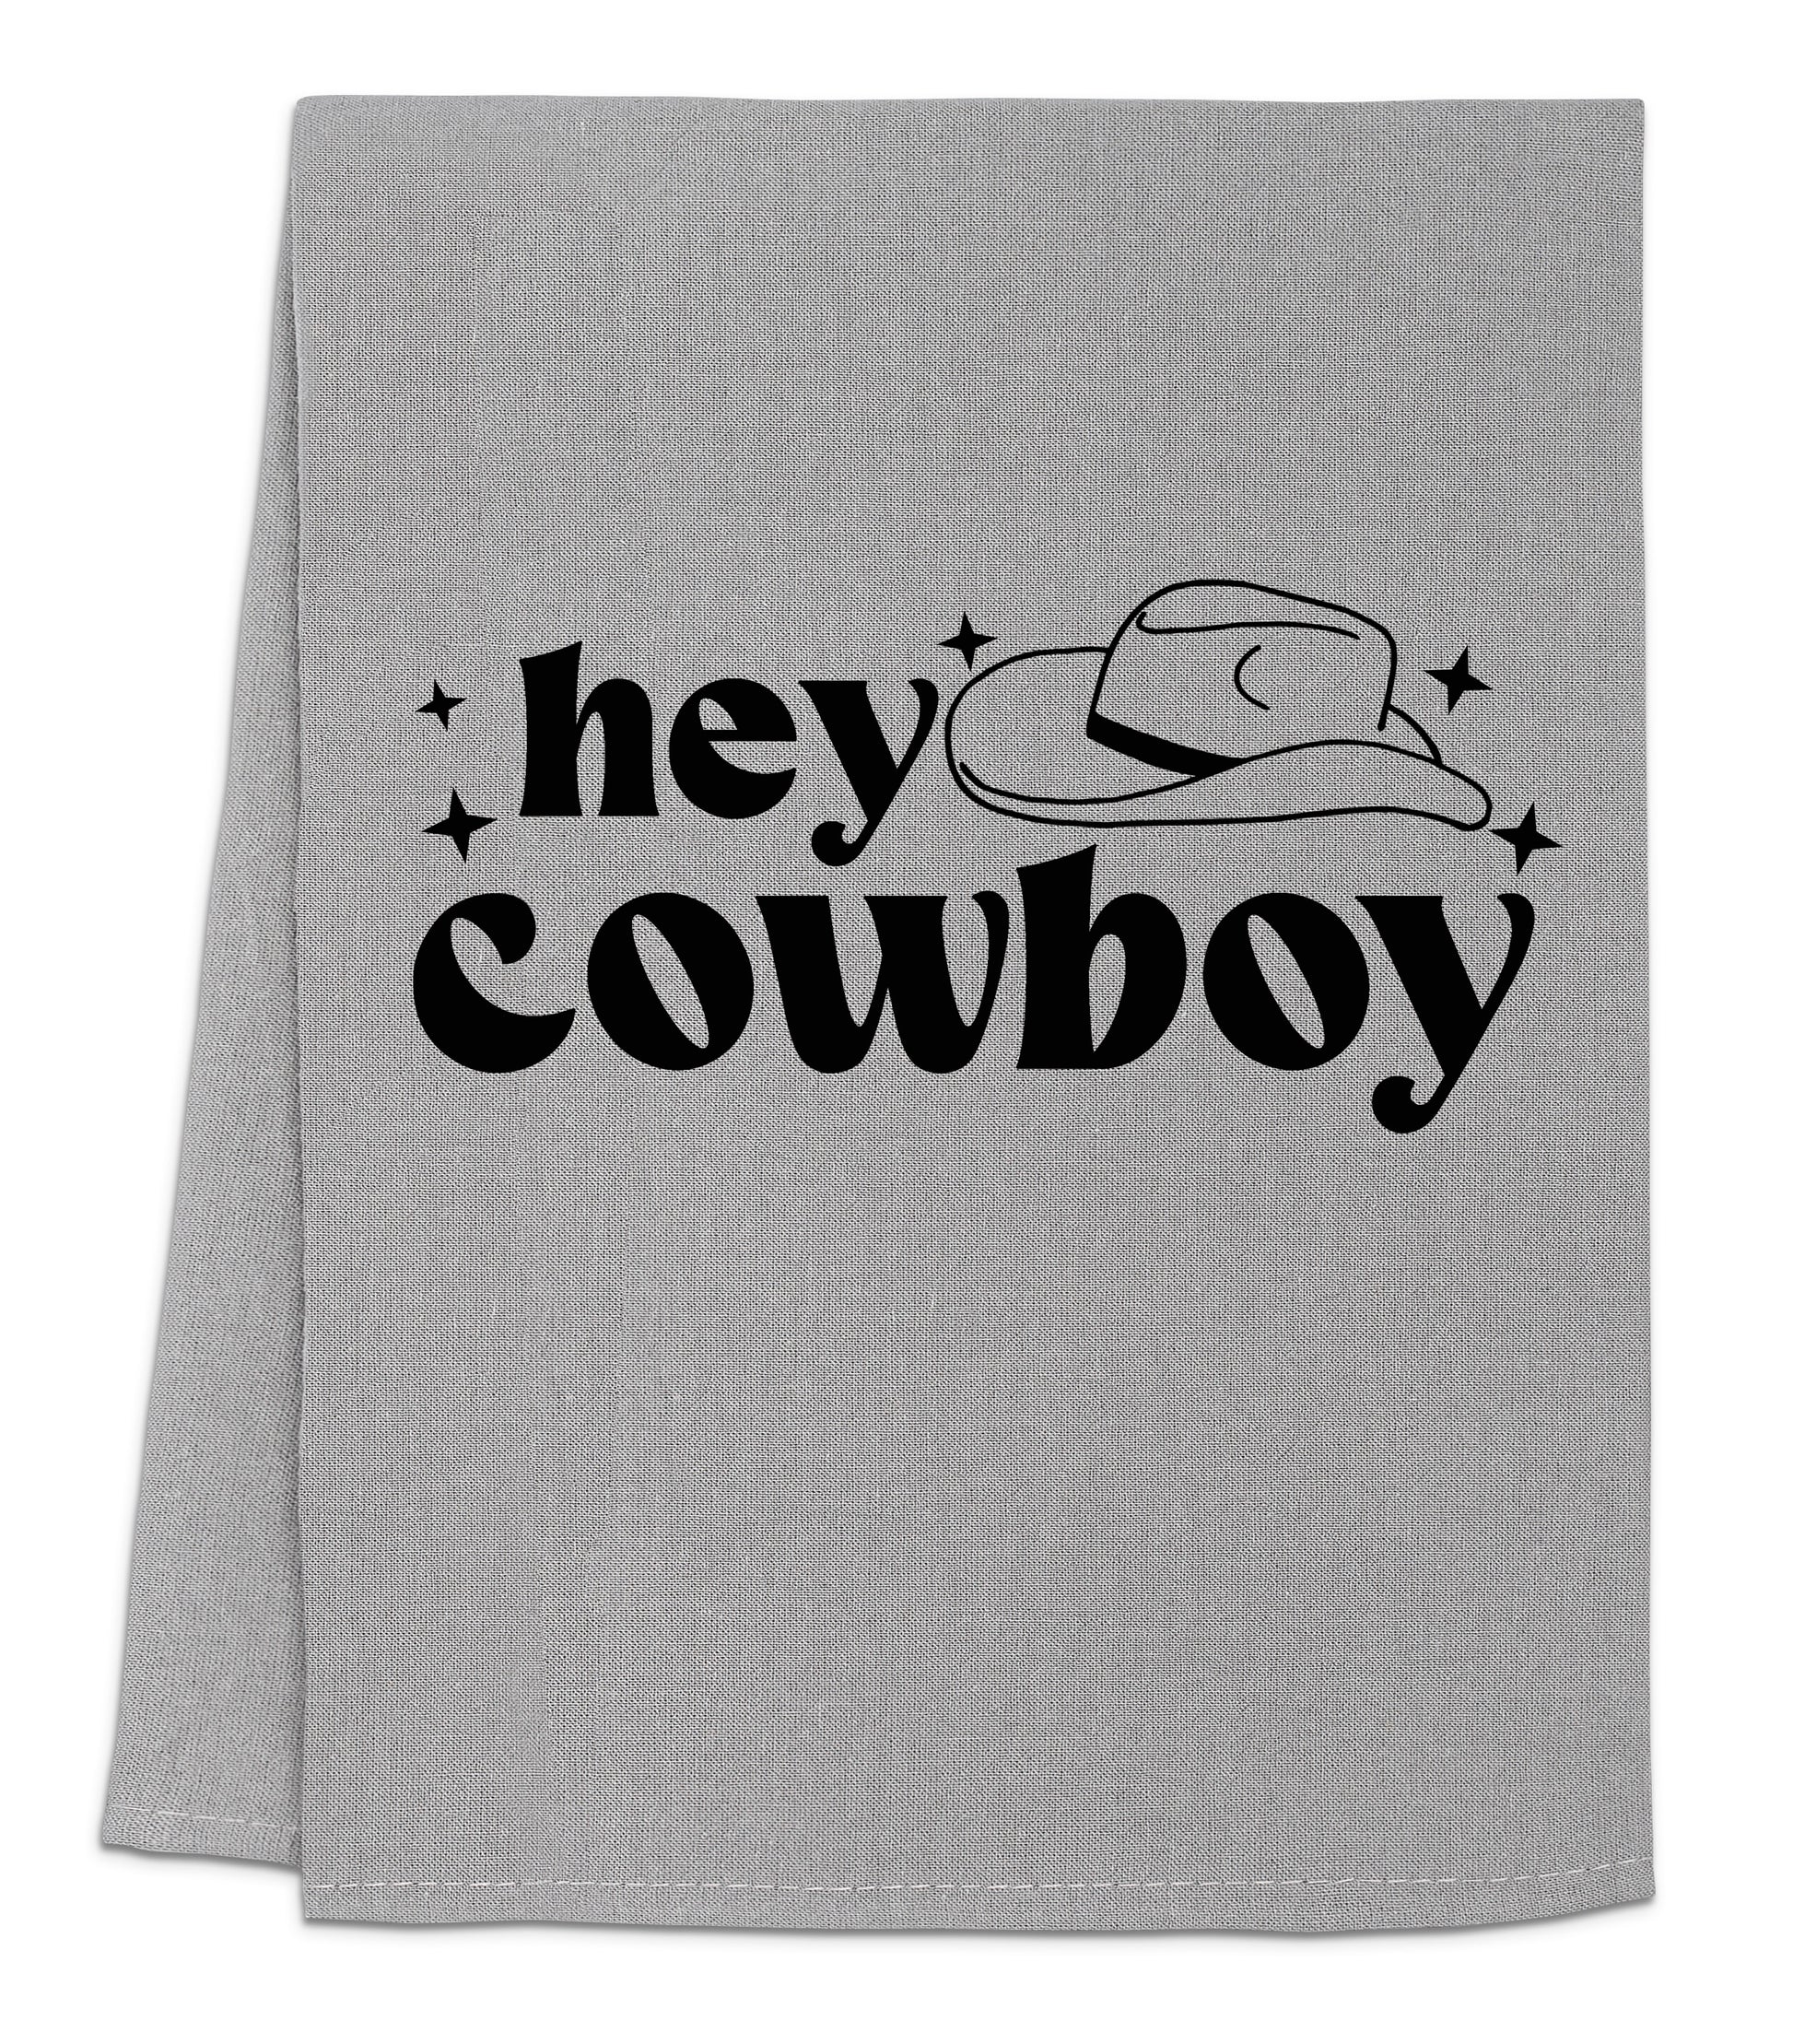 a gray towel with the words hey cowboy printed on it